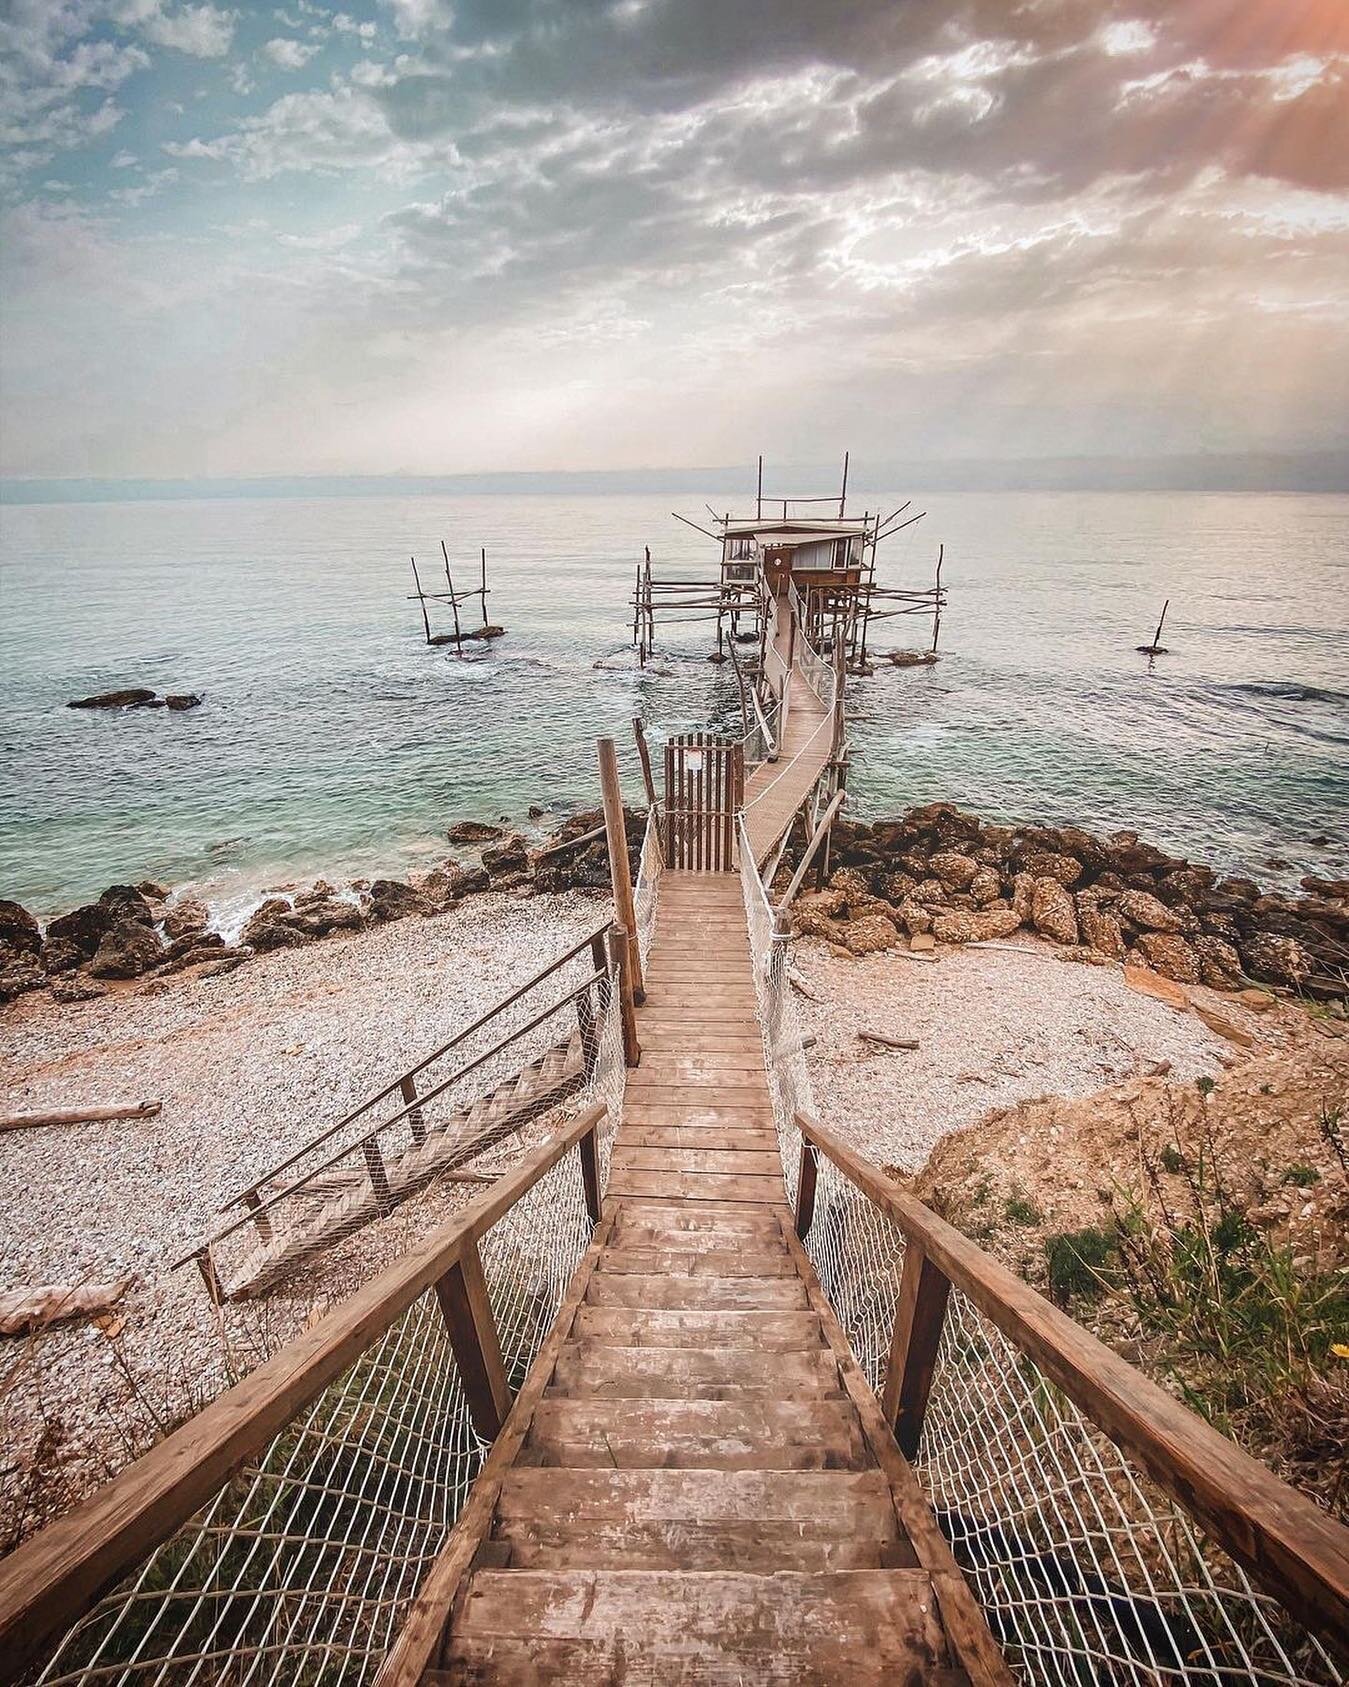 ☀️Wonderful shots of Trabocco, old fishing machines now used as seafood restaurants to enjoy a romantic dinner right above the sea 🤩 an experience to add to your bucket list 🌊✔️

📸 by @_robertorinaldi_ 👏

#howitalyfeels #mediterraneo #paesaggidab